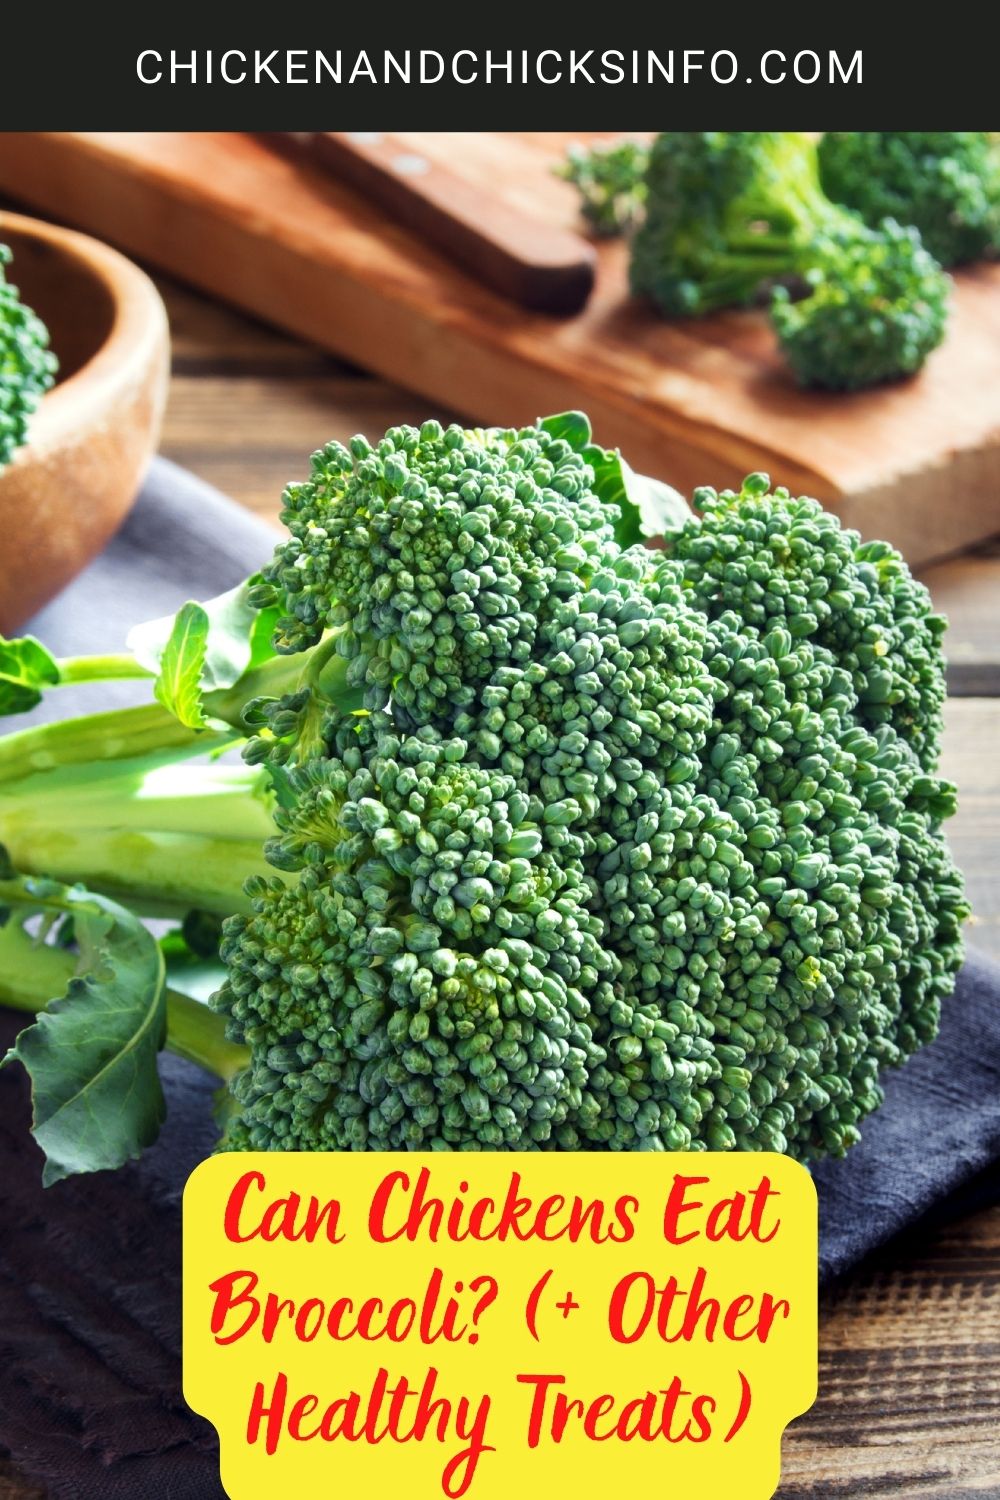 Can Chickens Eat Broccoli? (+ Other Healthy Treats) poster.
